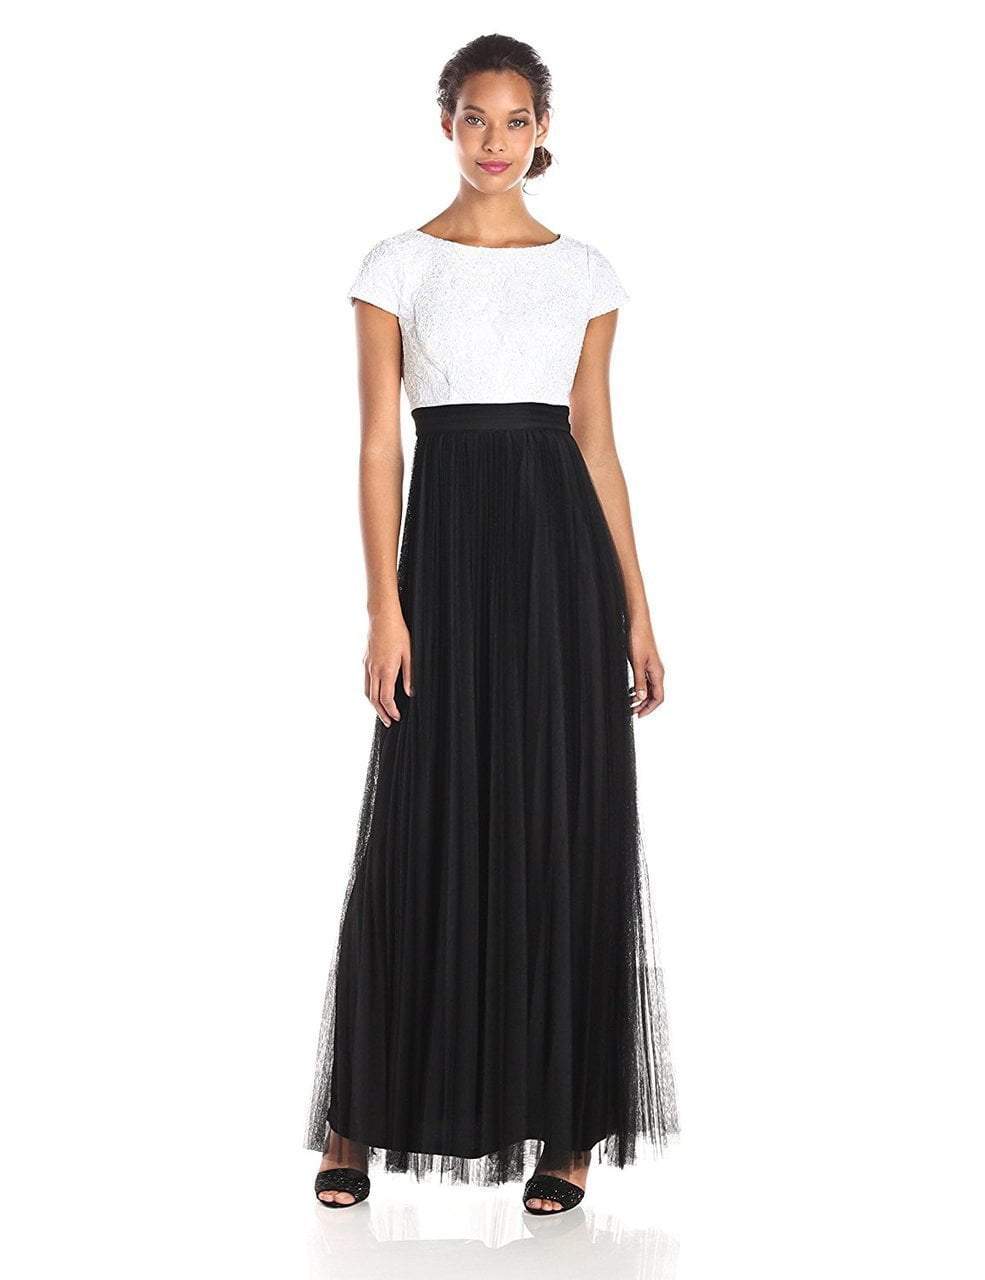 Adrianna Papell - 81907380 Floral Lace Pleated A Line Dress in Black and White